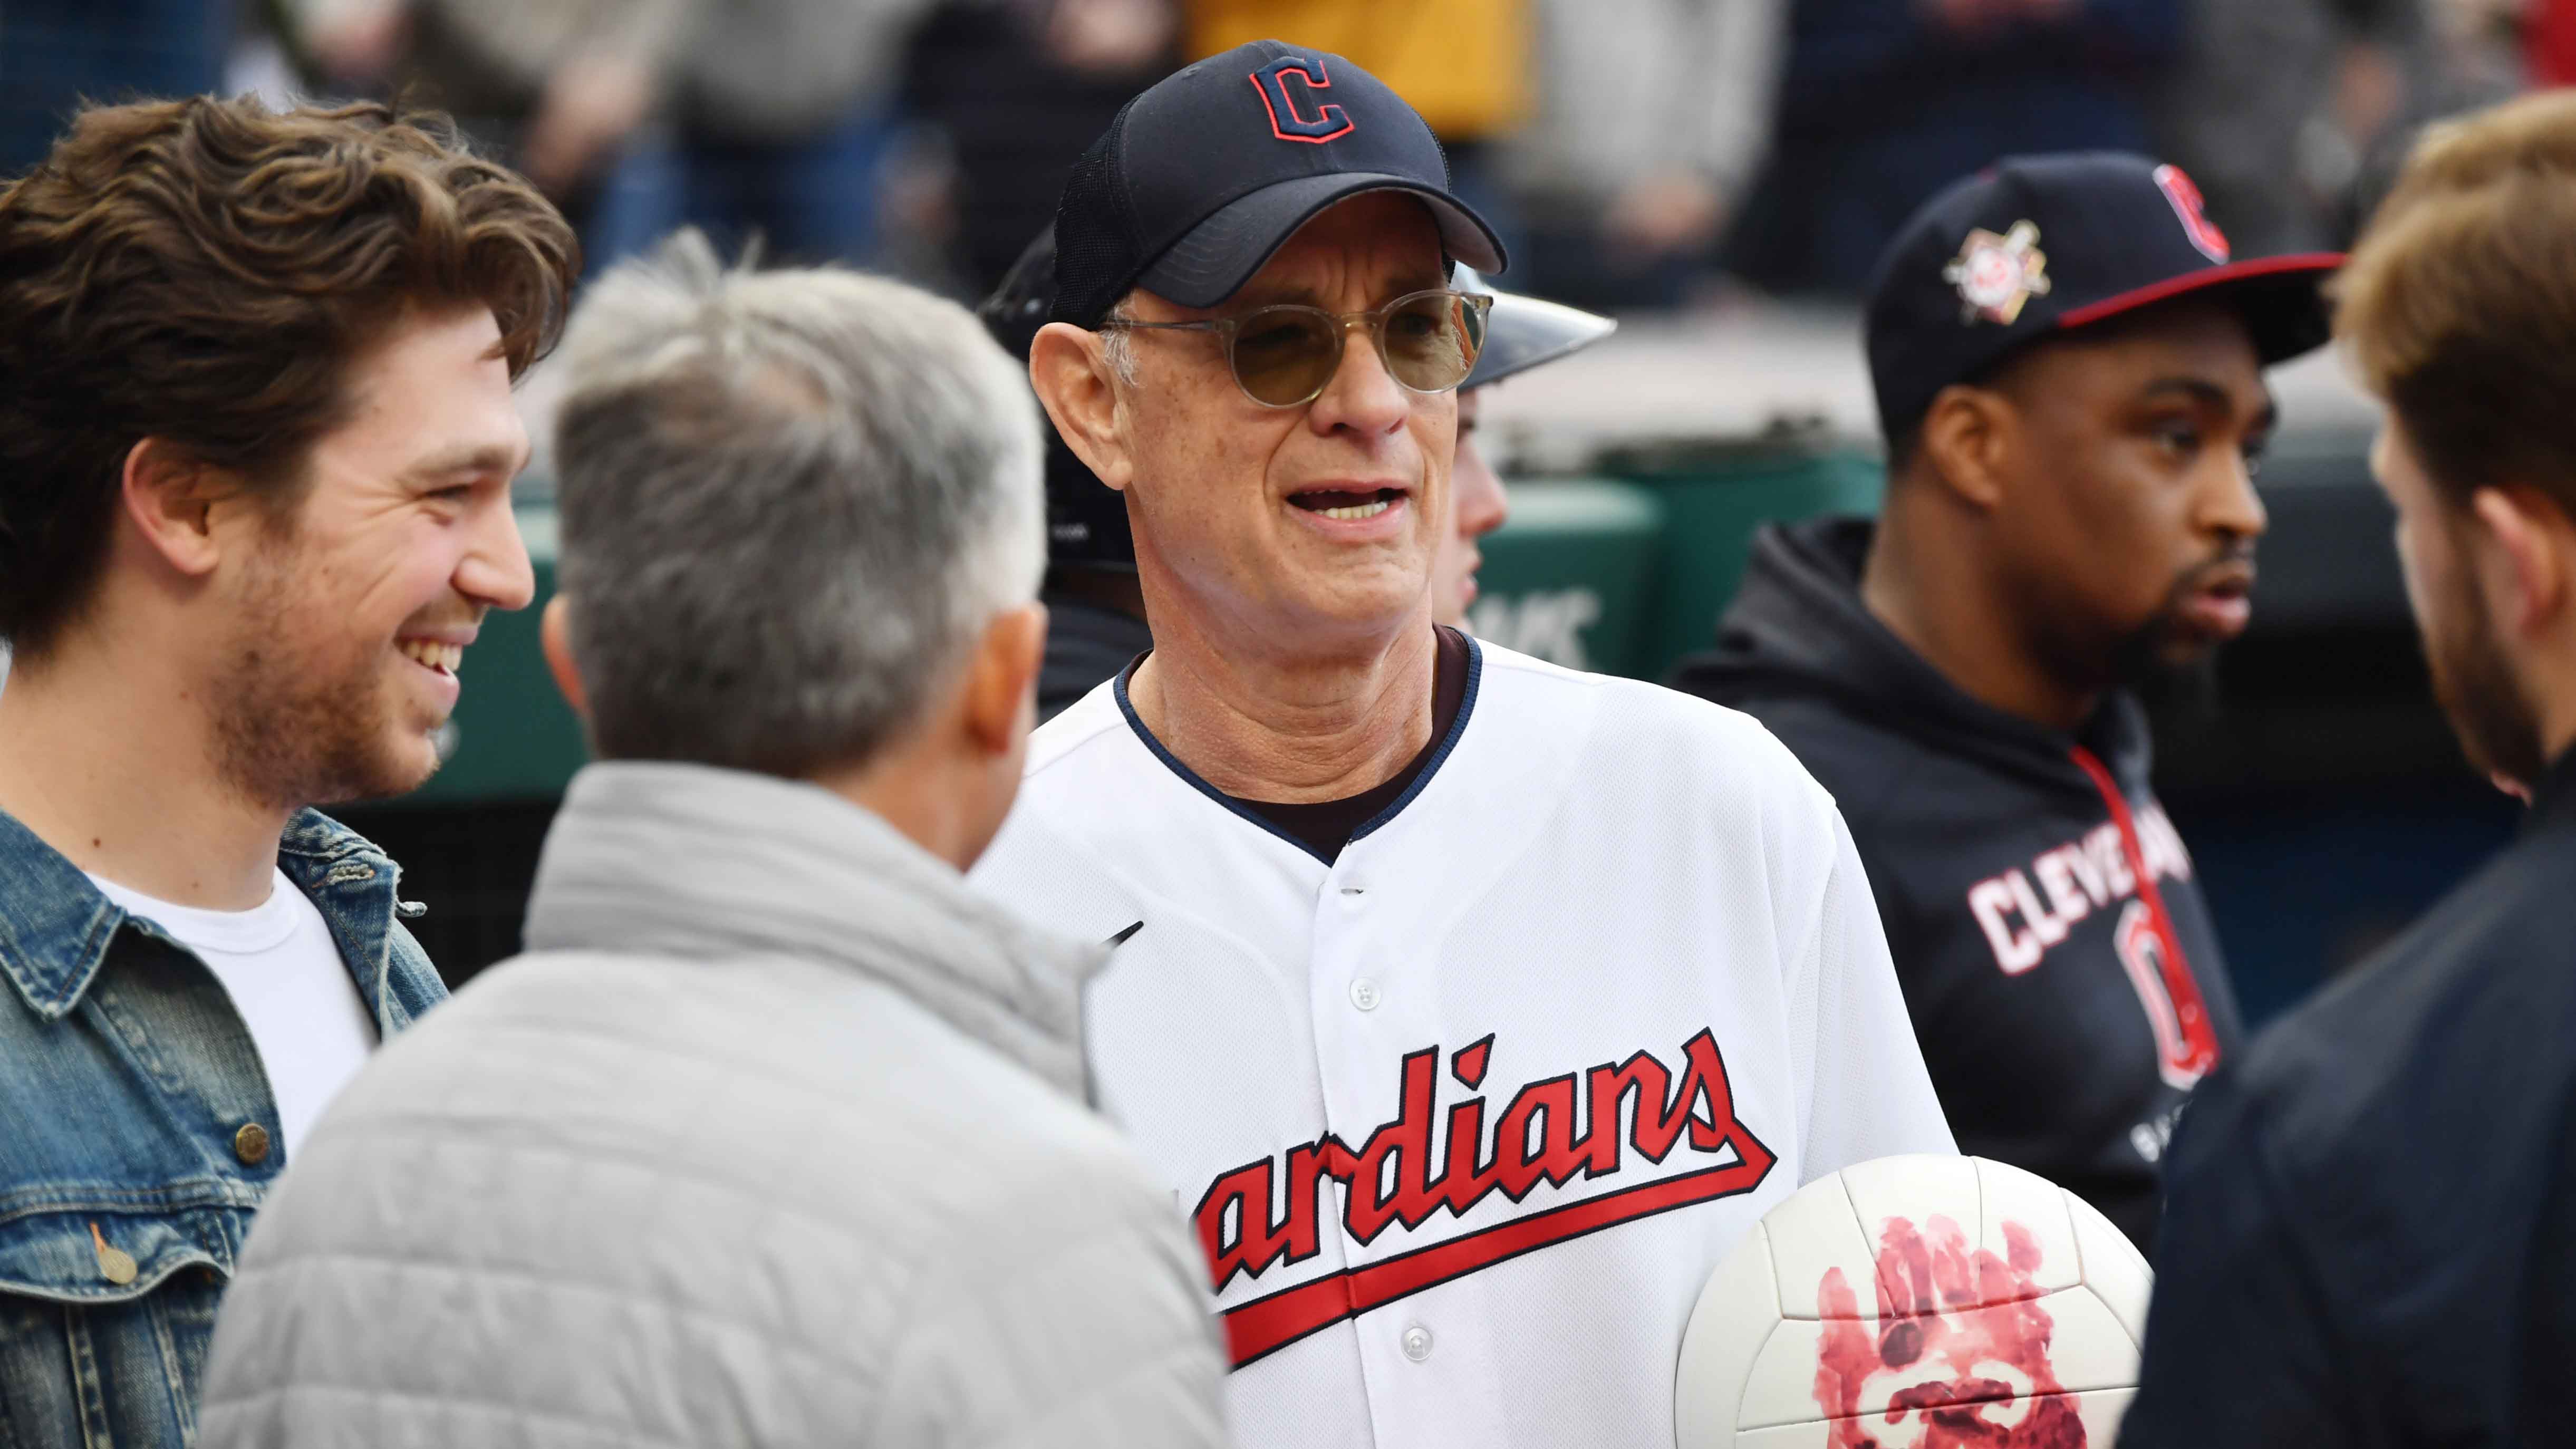 Cleveland Guardians: Tom Hanks helps announce MLB team's new name